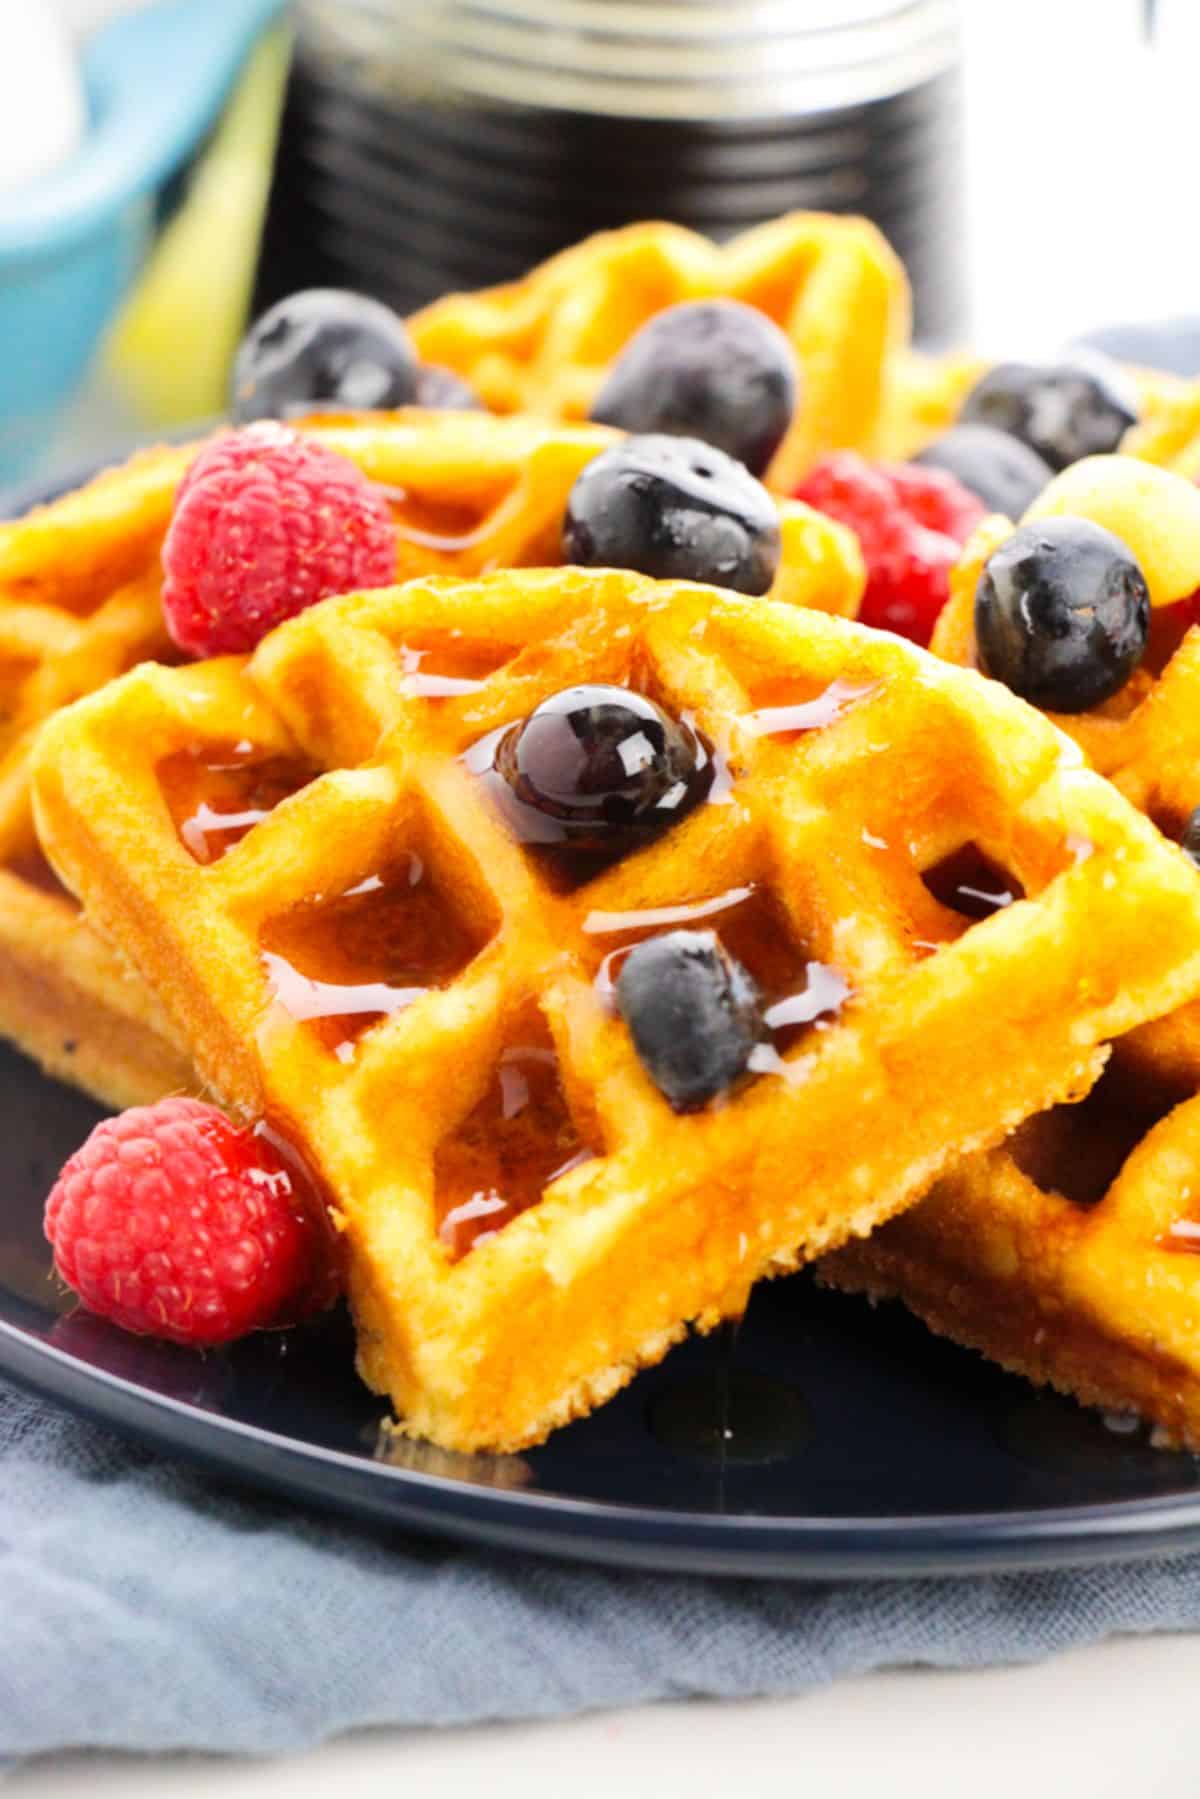 Cake Mix Waffles on a serving plate, garnished with maple syrup and berries.